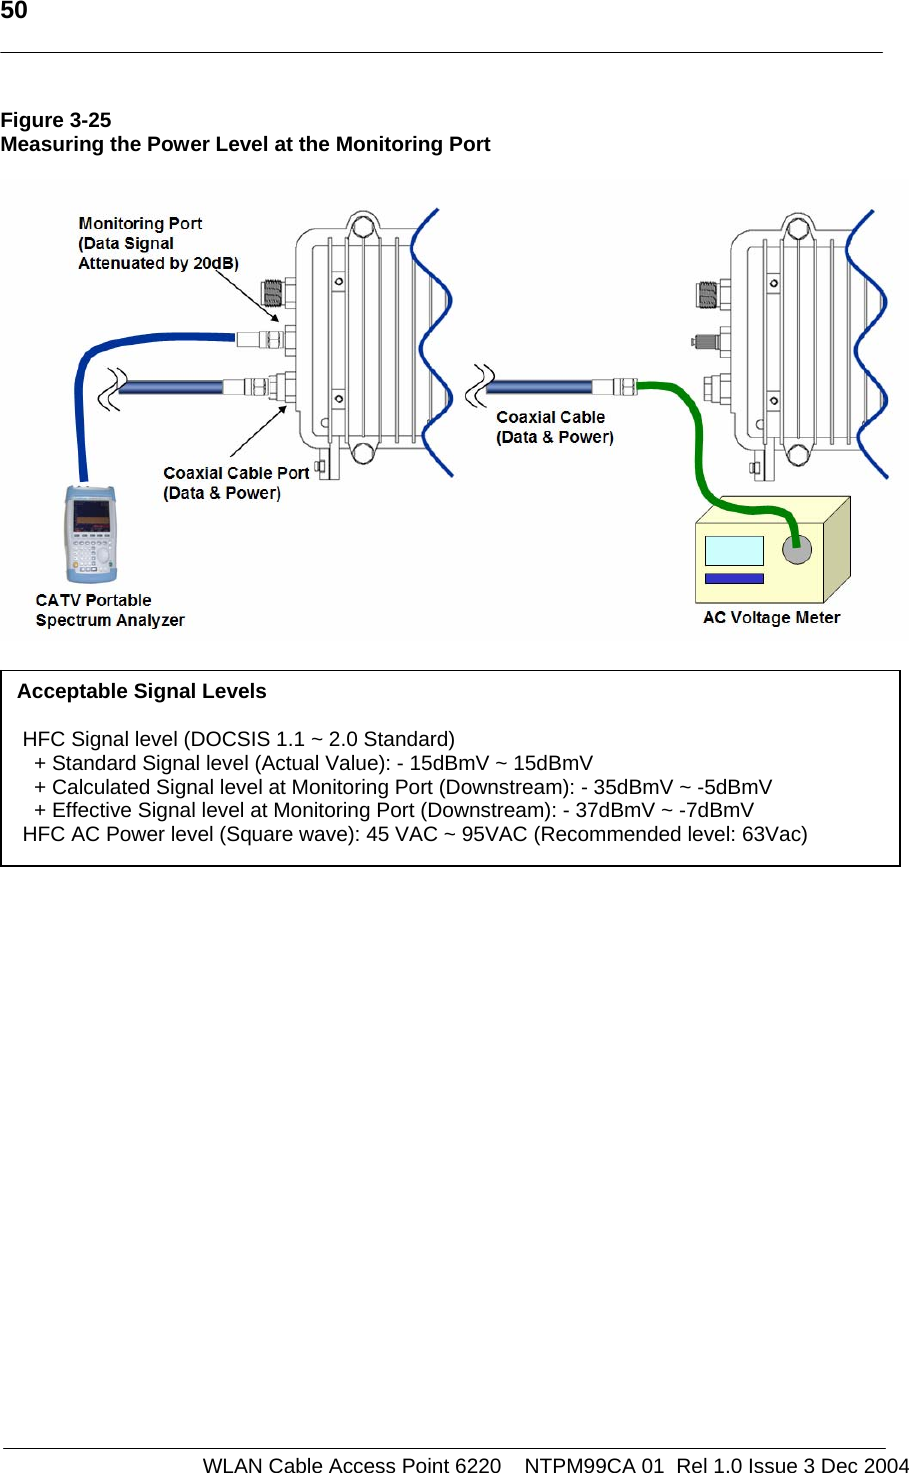   50    WLAN Cable Access Point 6220    NTPM99CA 01  Rel 1.0 Issue 3 Dec 2004 Figure 3-25 Measuring the Power Level at the Monitoring Port                         Acceptable Signal Levels   HFC Signal level (DOCSIS 1.1 ~ 2.0 Standard)    + Standard Signal level (Actual Value): - 15dBmV ~ 15dBmV    + Calculated Signal level at Monitoring Port (Downstream): - 35dBmV ~ -5dBmV    + Effective Signal level at Monitoring Port (Downstream): - 37dBmV ~ -7dBmV  HFC AC Power level (Square wave): 45 VAC ~ 95VAC (Recommended level: 63Vac) 